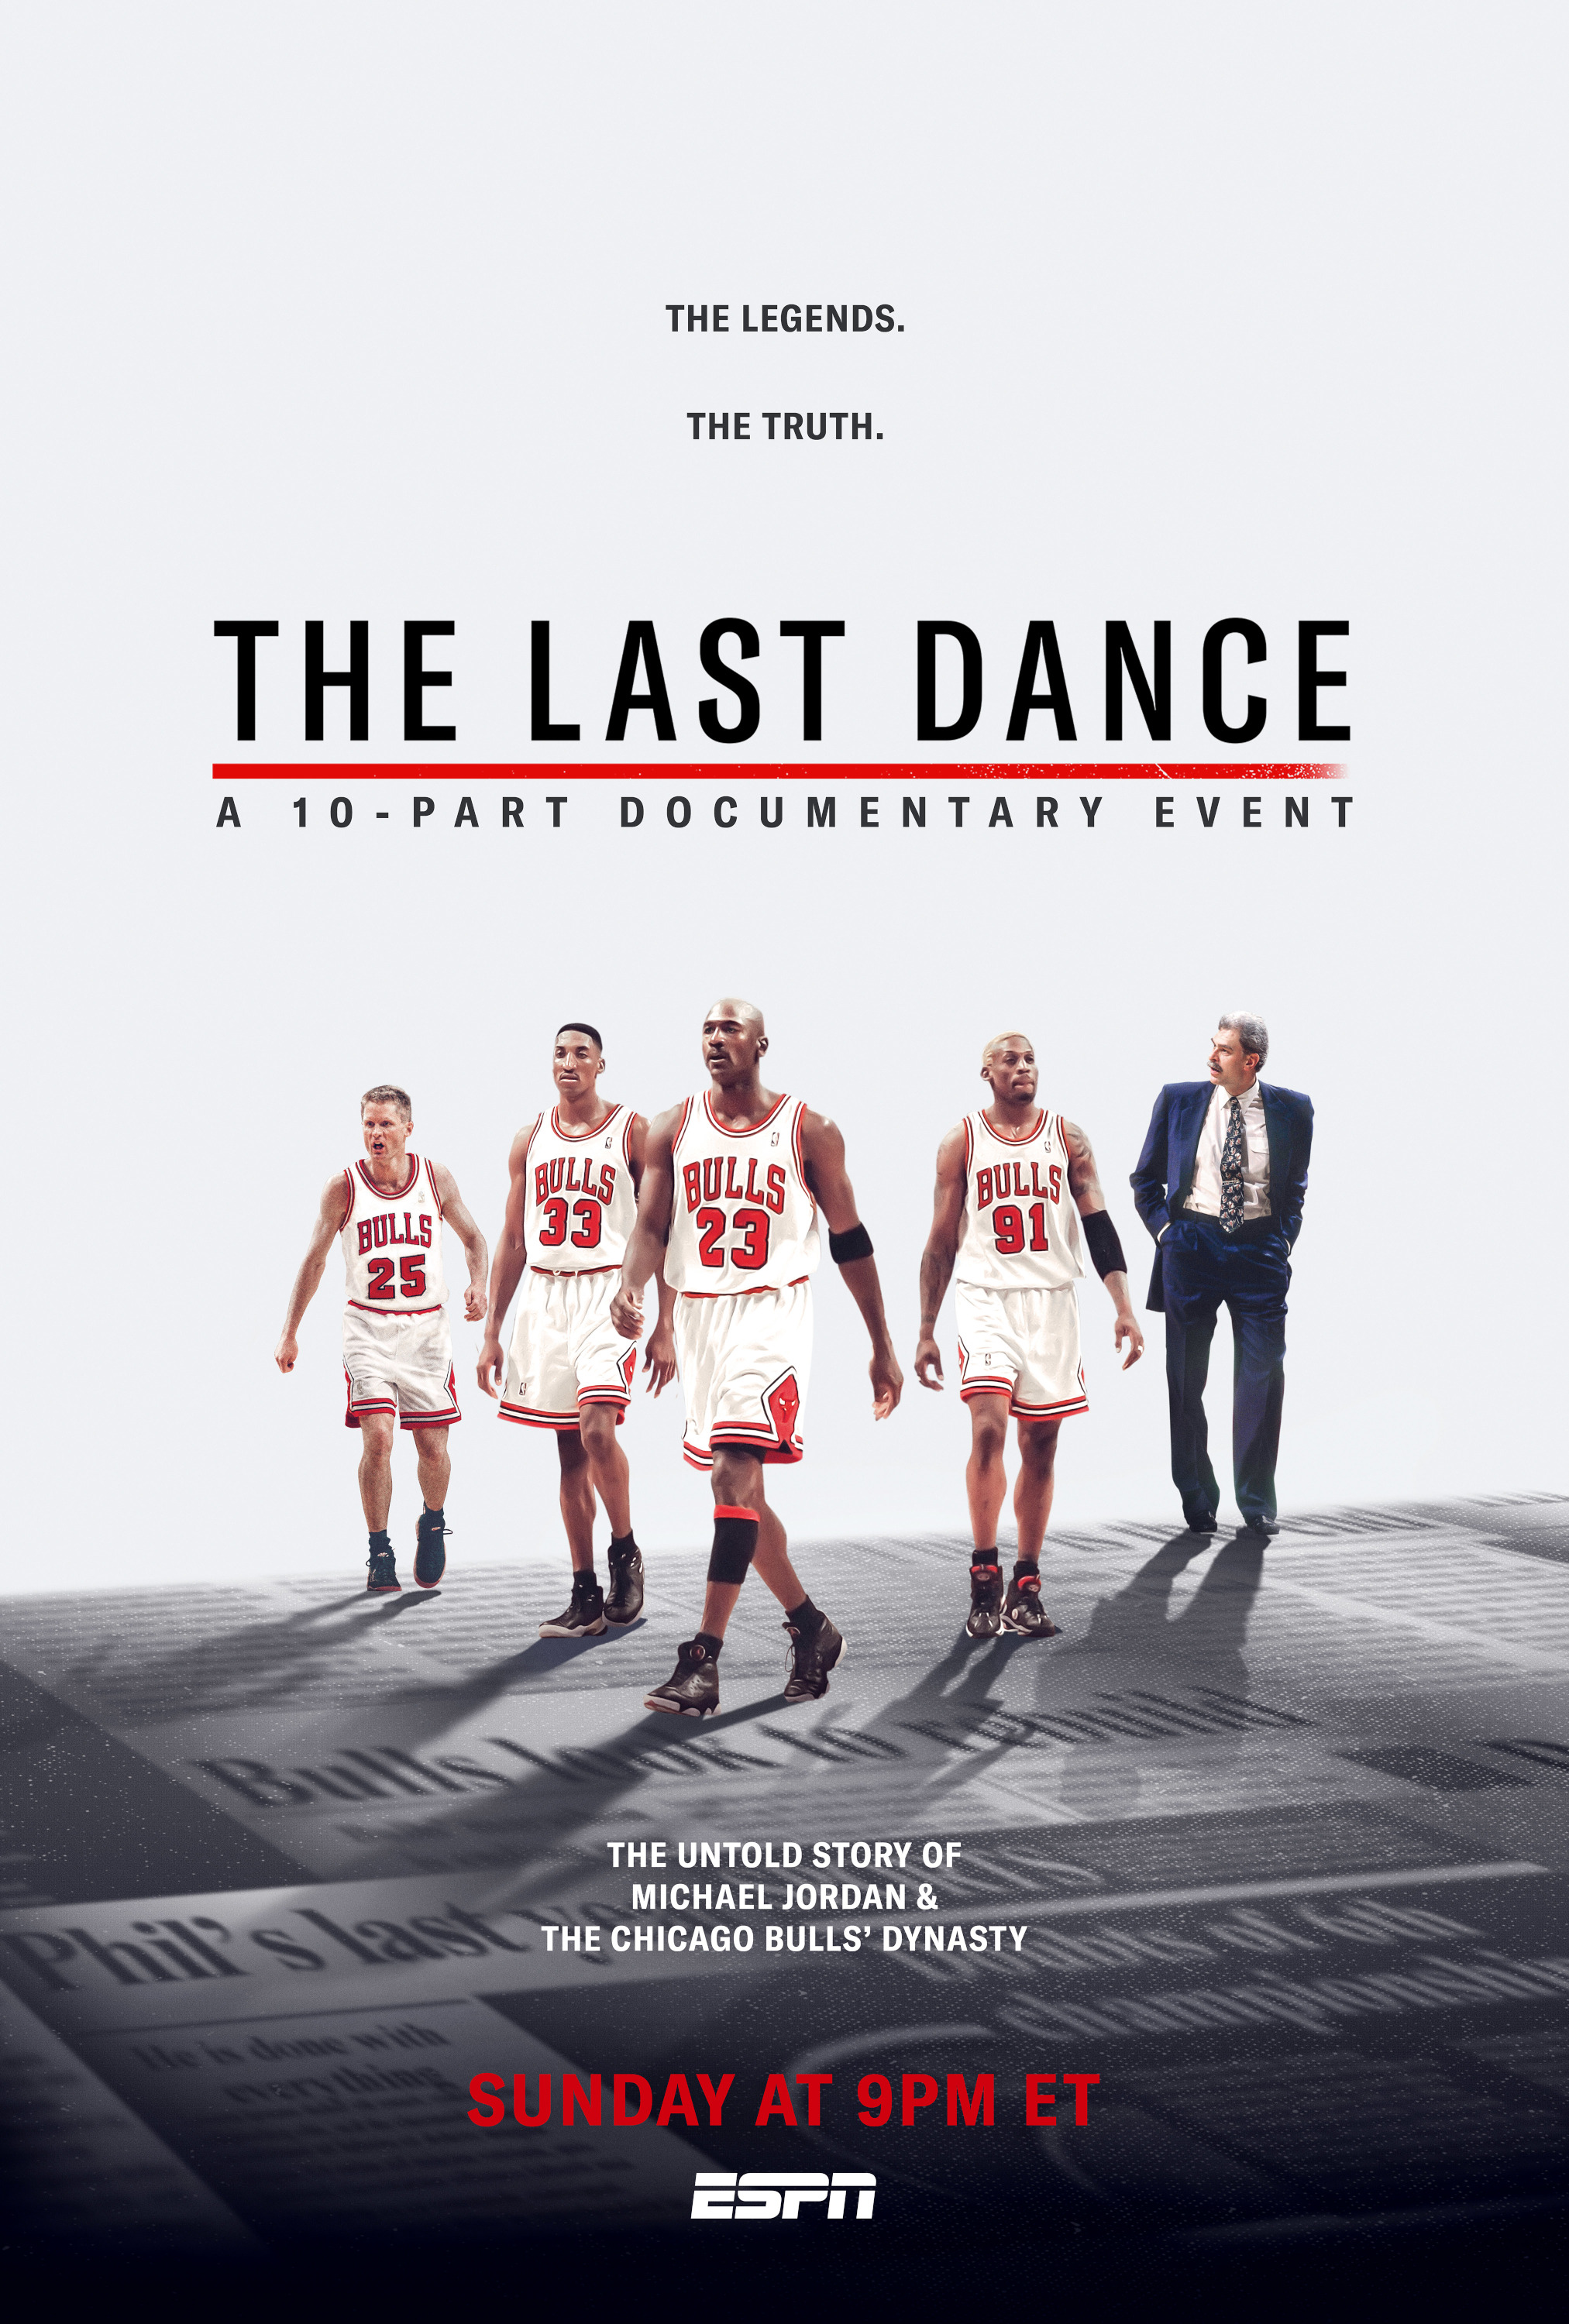 The Last Dance - Promotional Poster on Behance